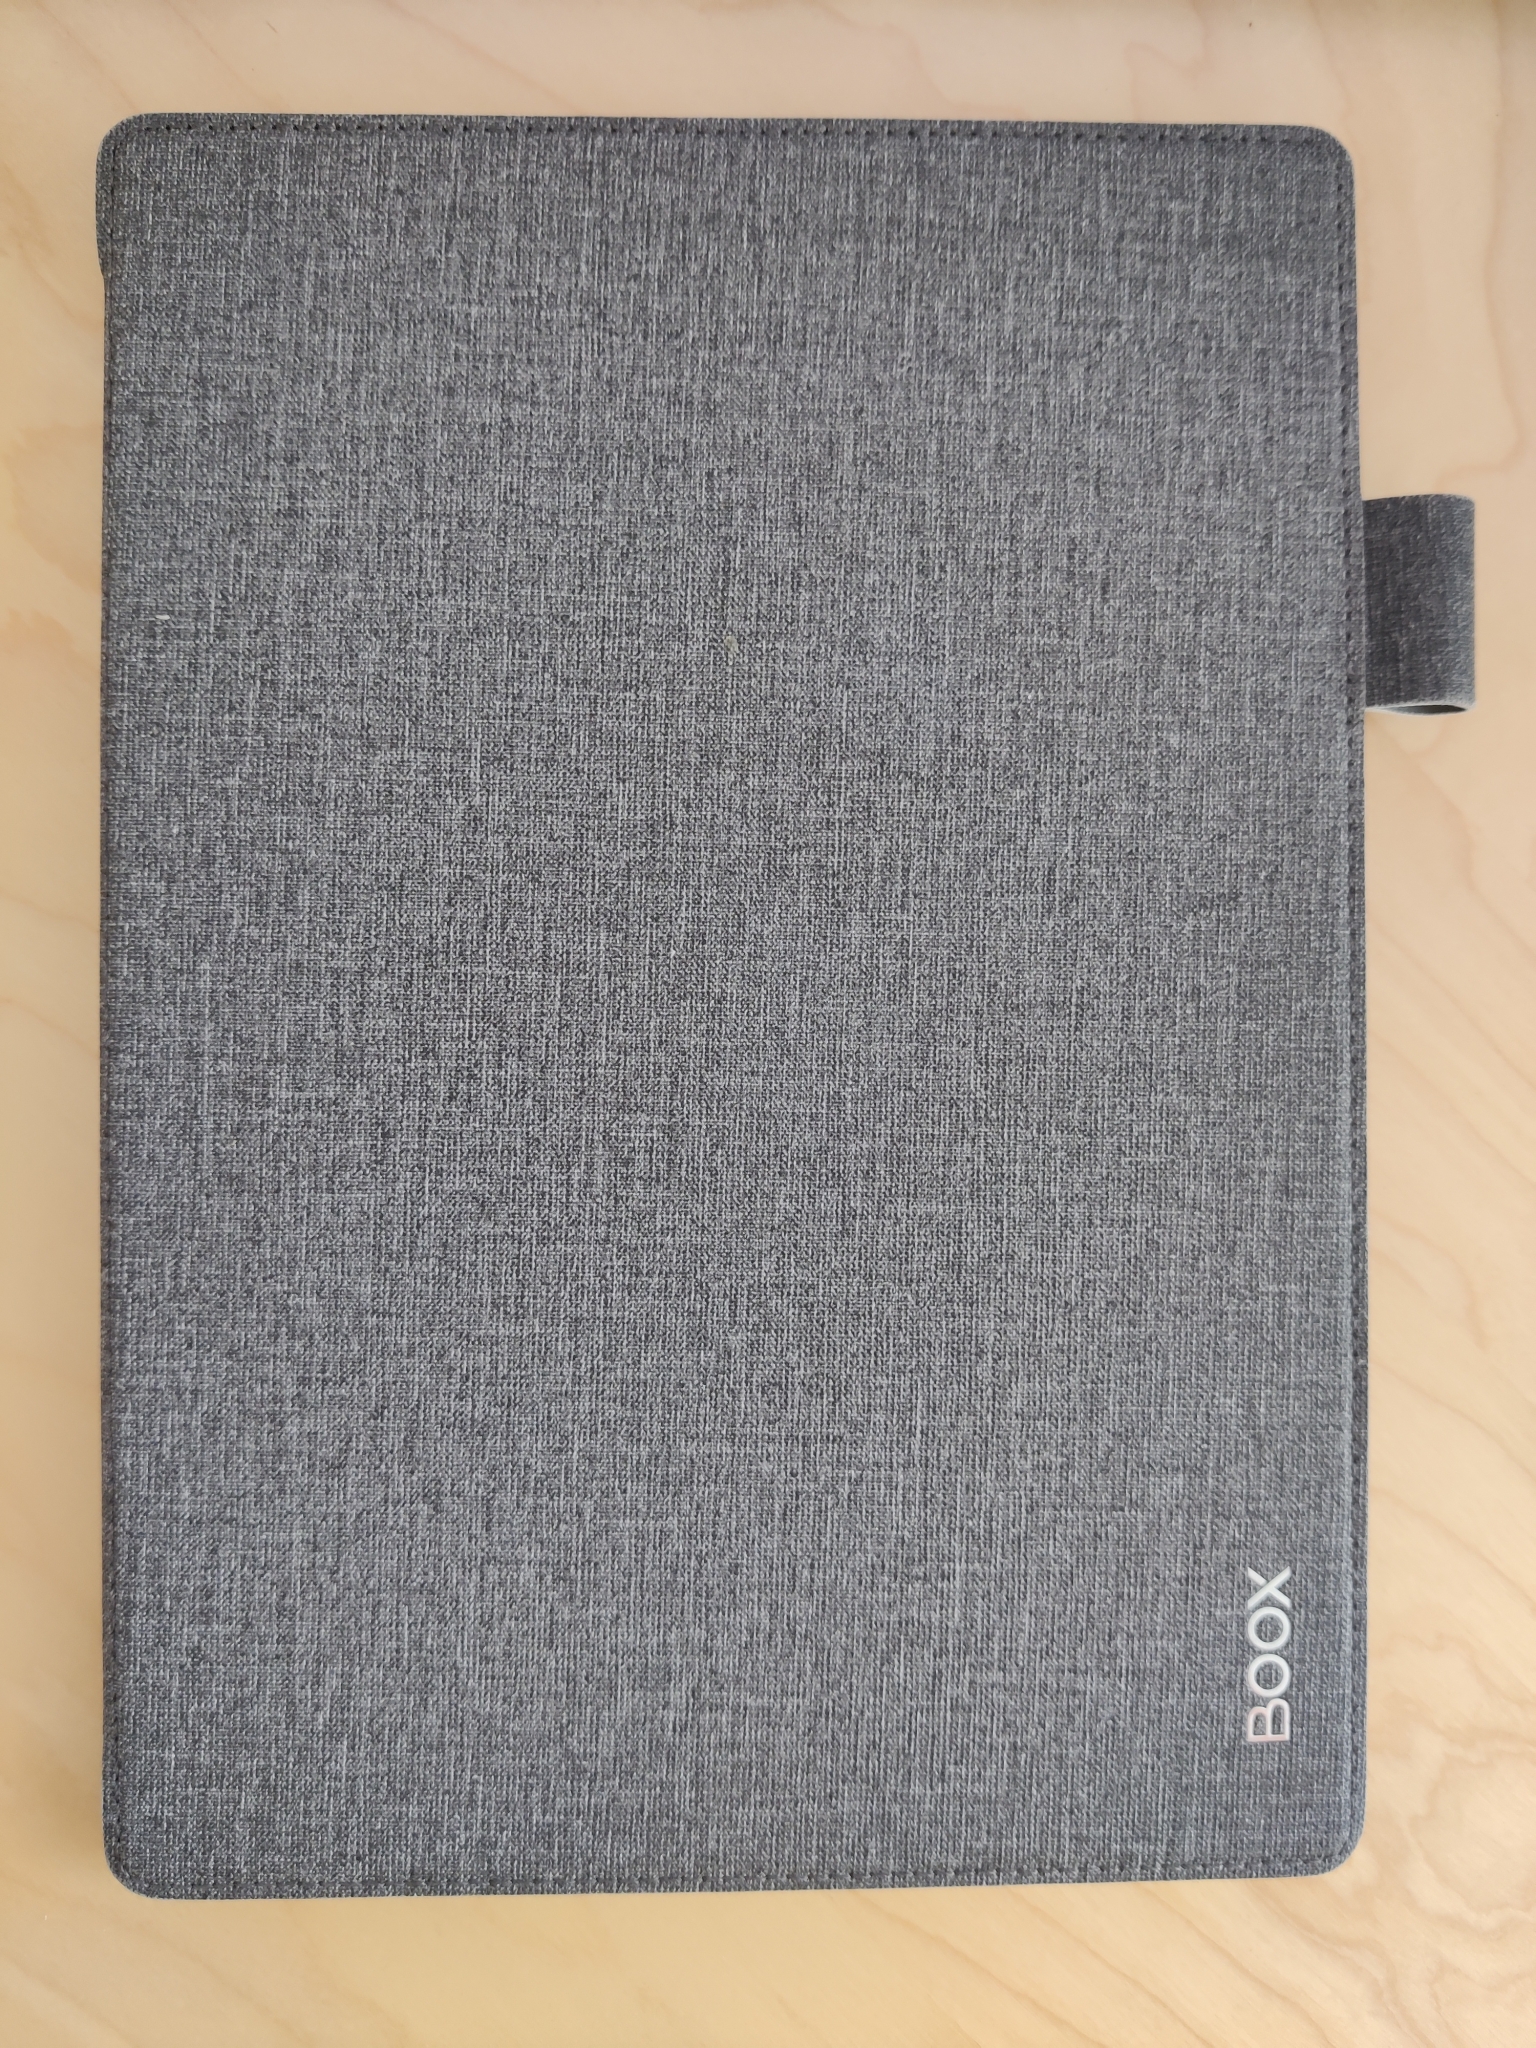 Boox Note 2 with cover